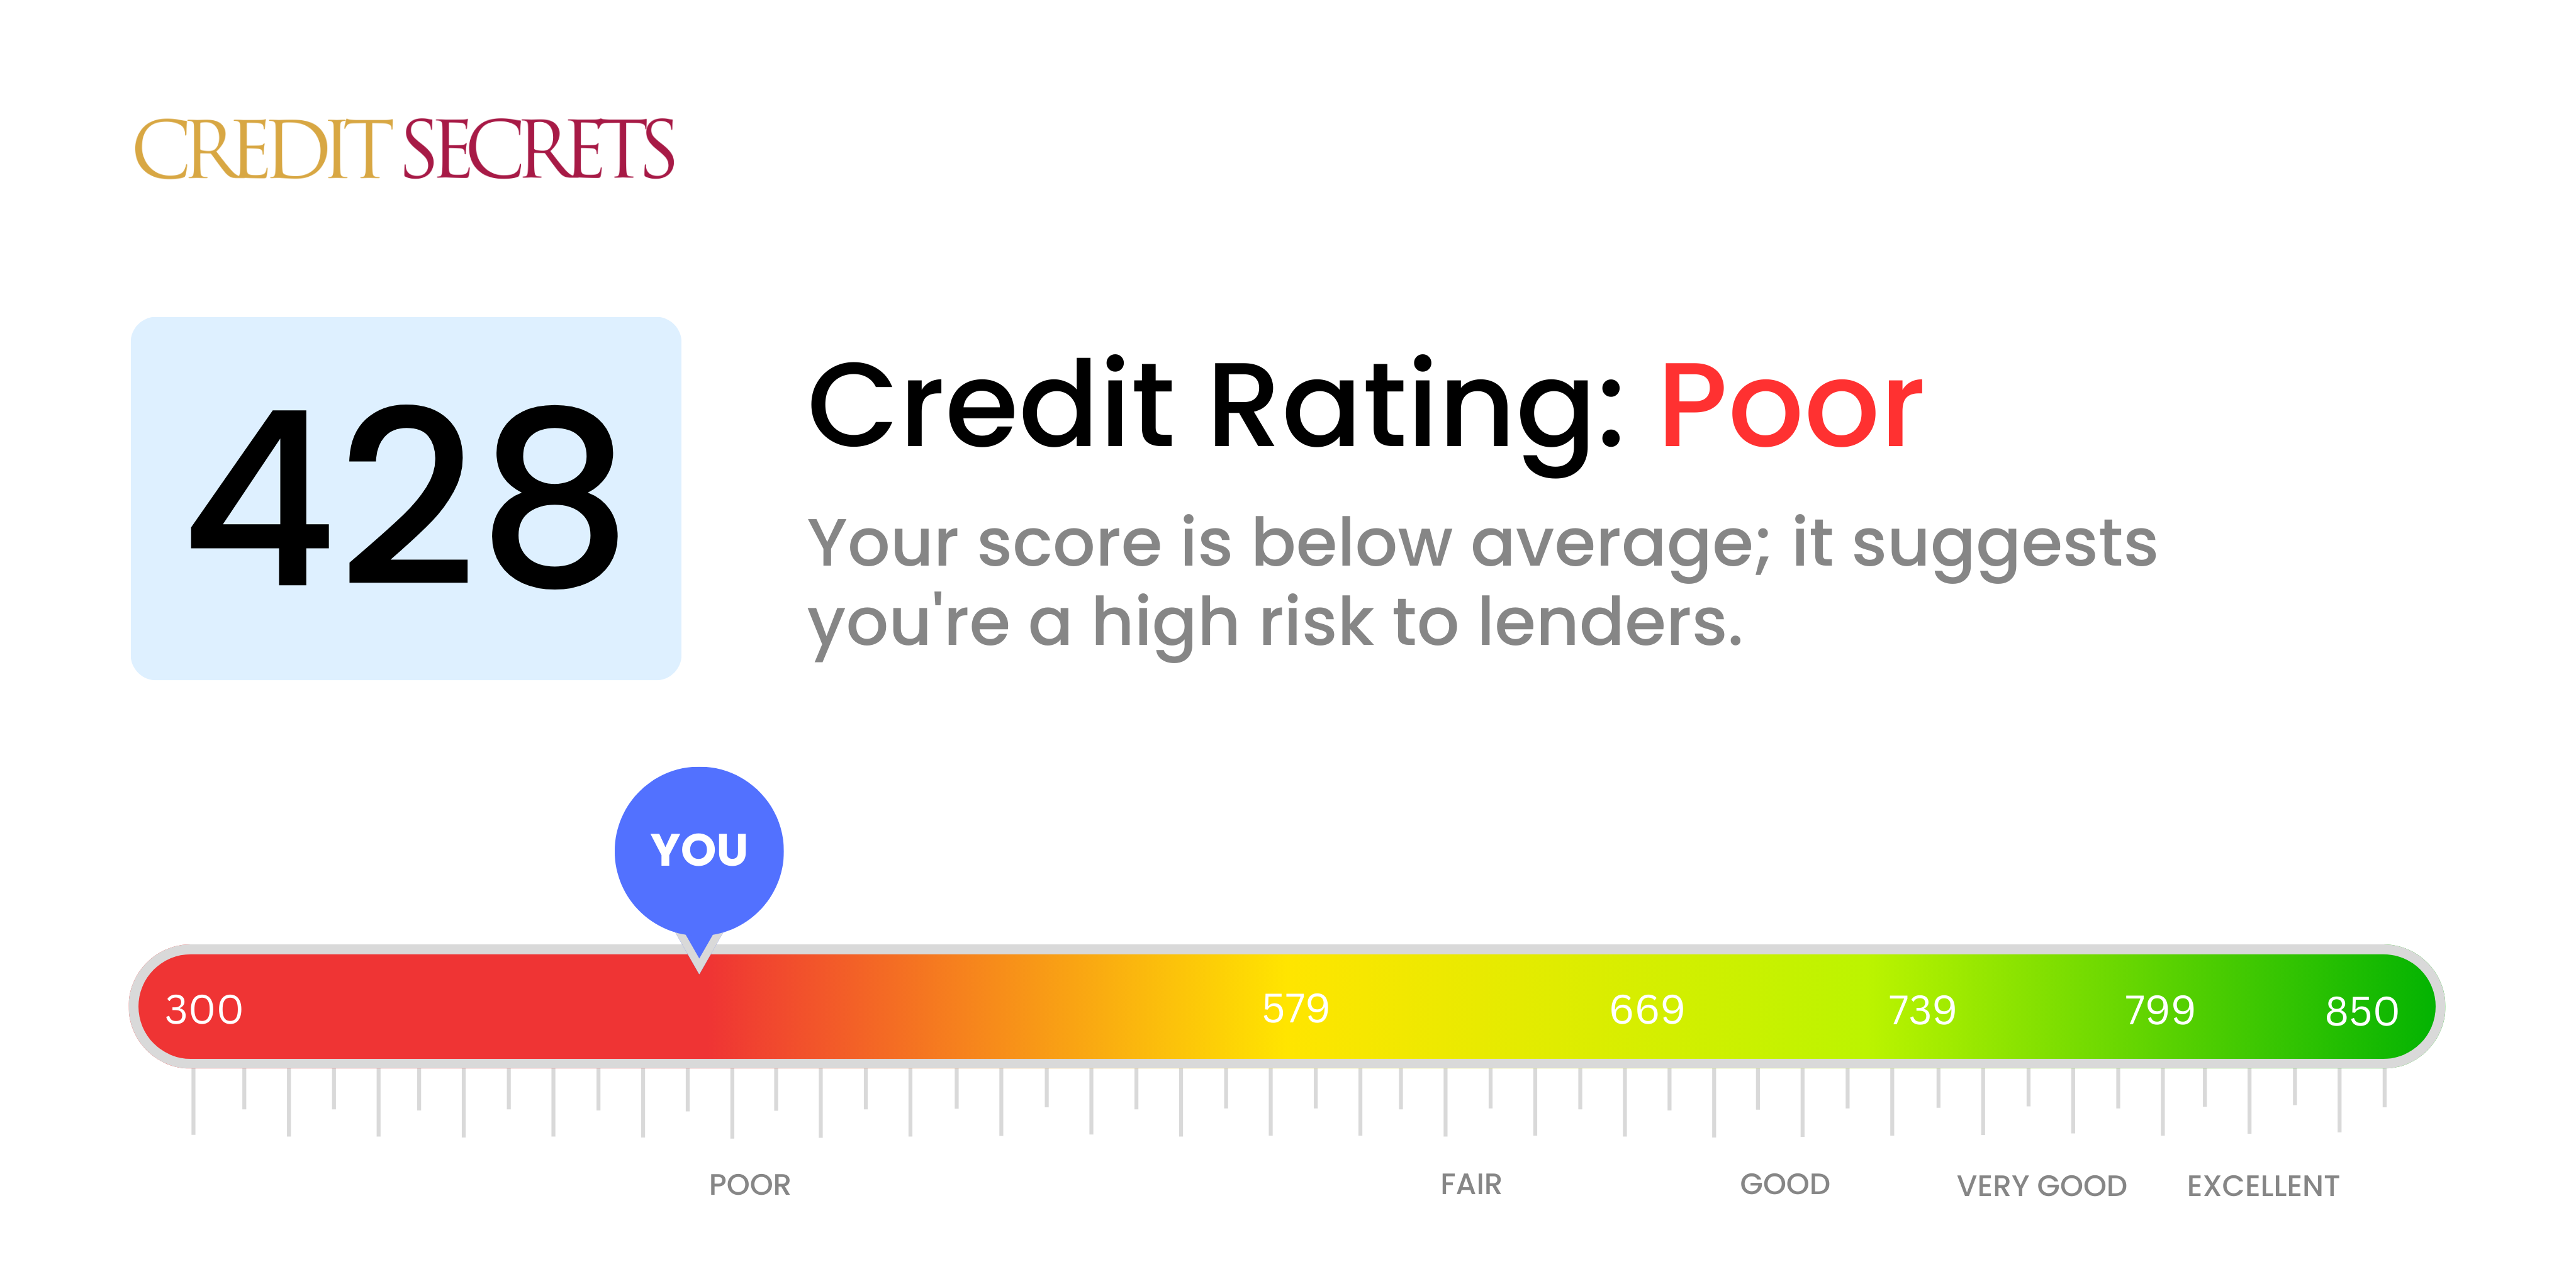 Is 428 a good credit score?